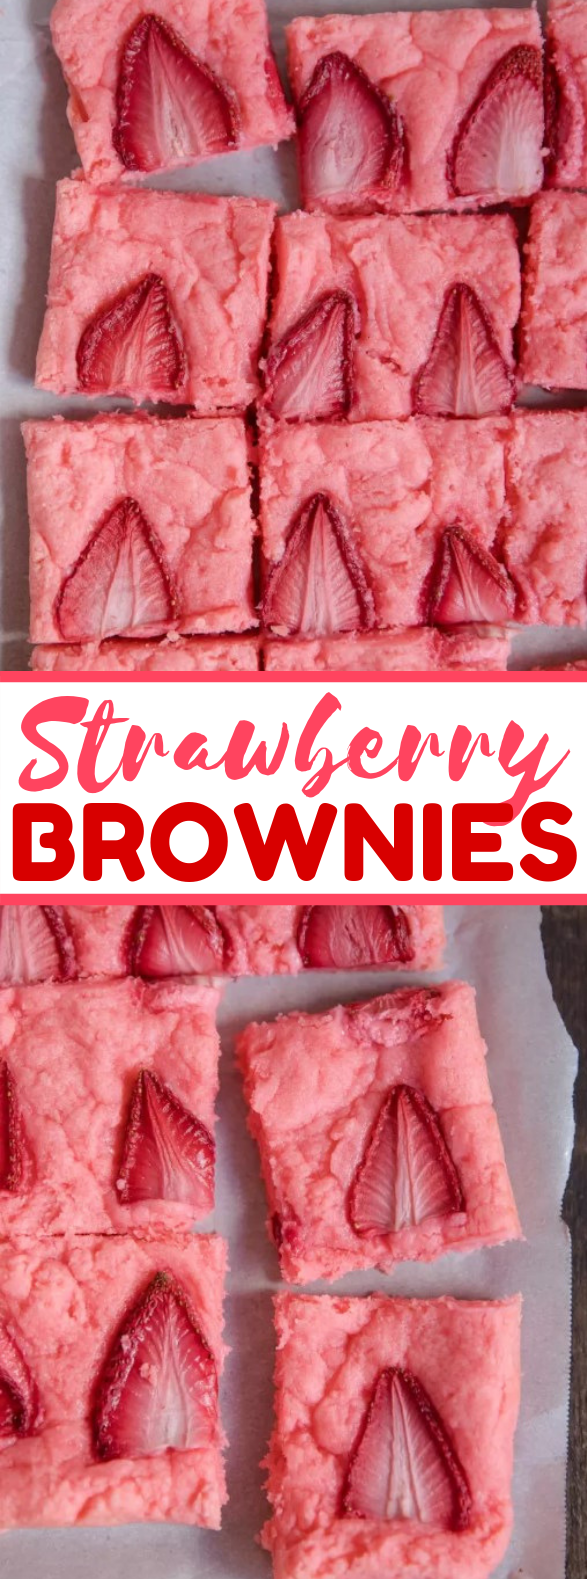 STRAWBERRY BROWNIES #desserts #simple